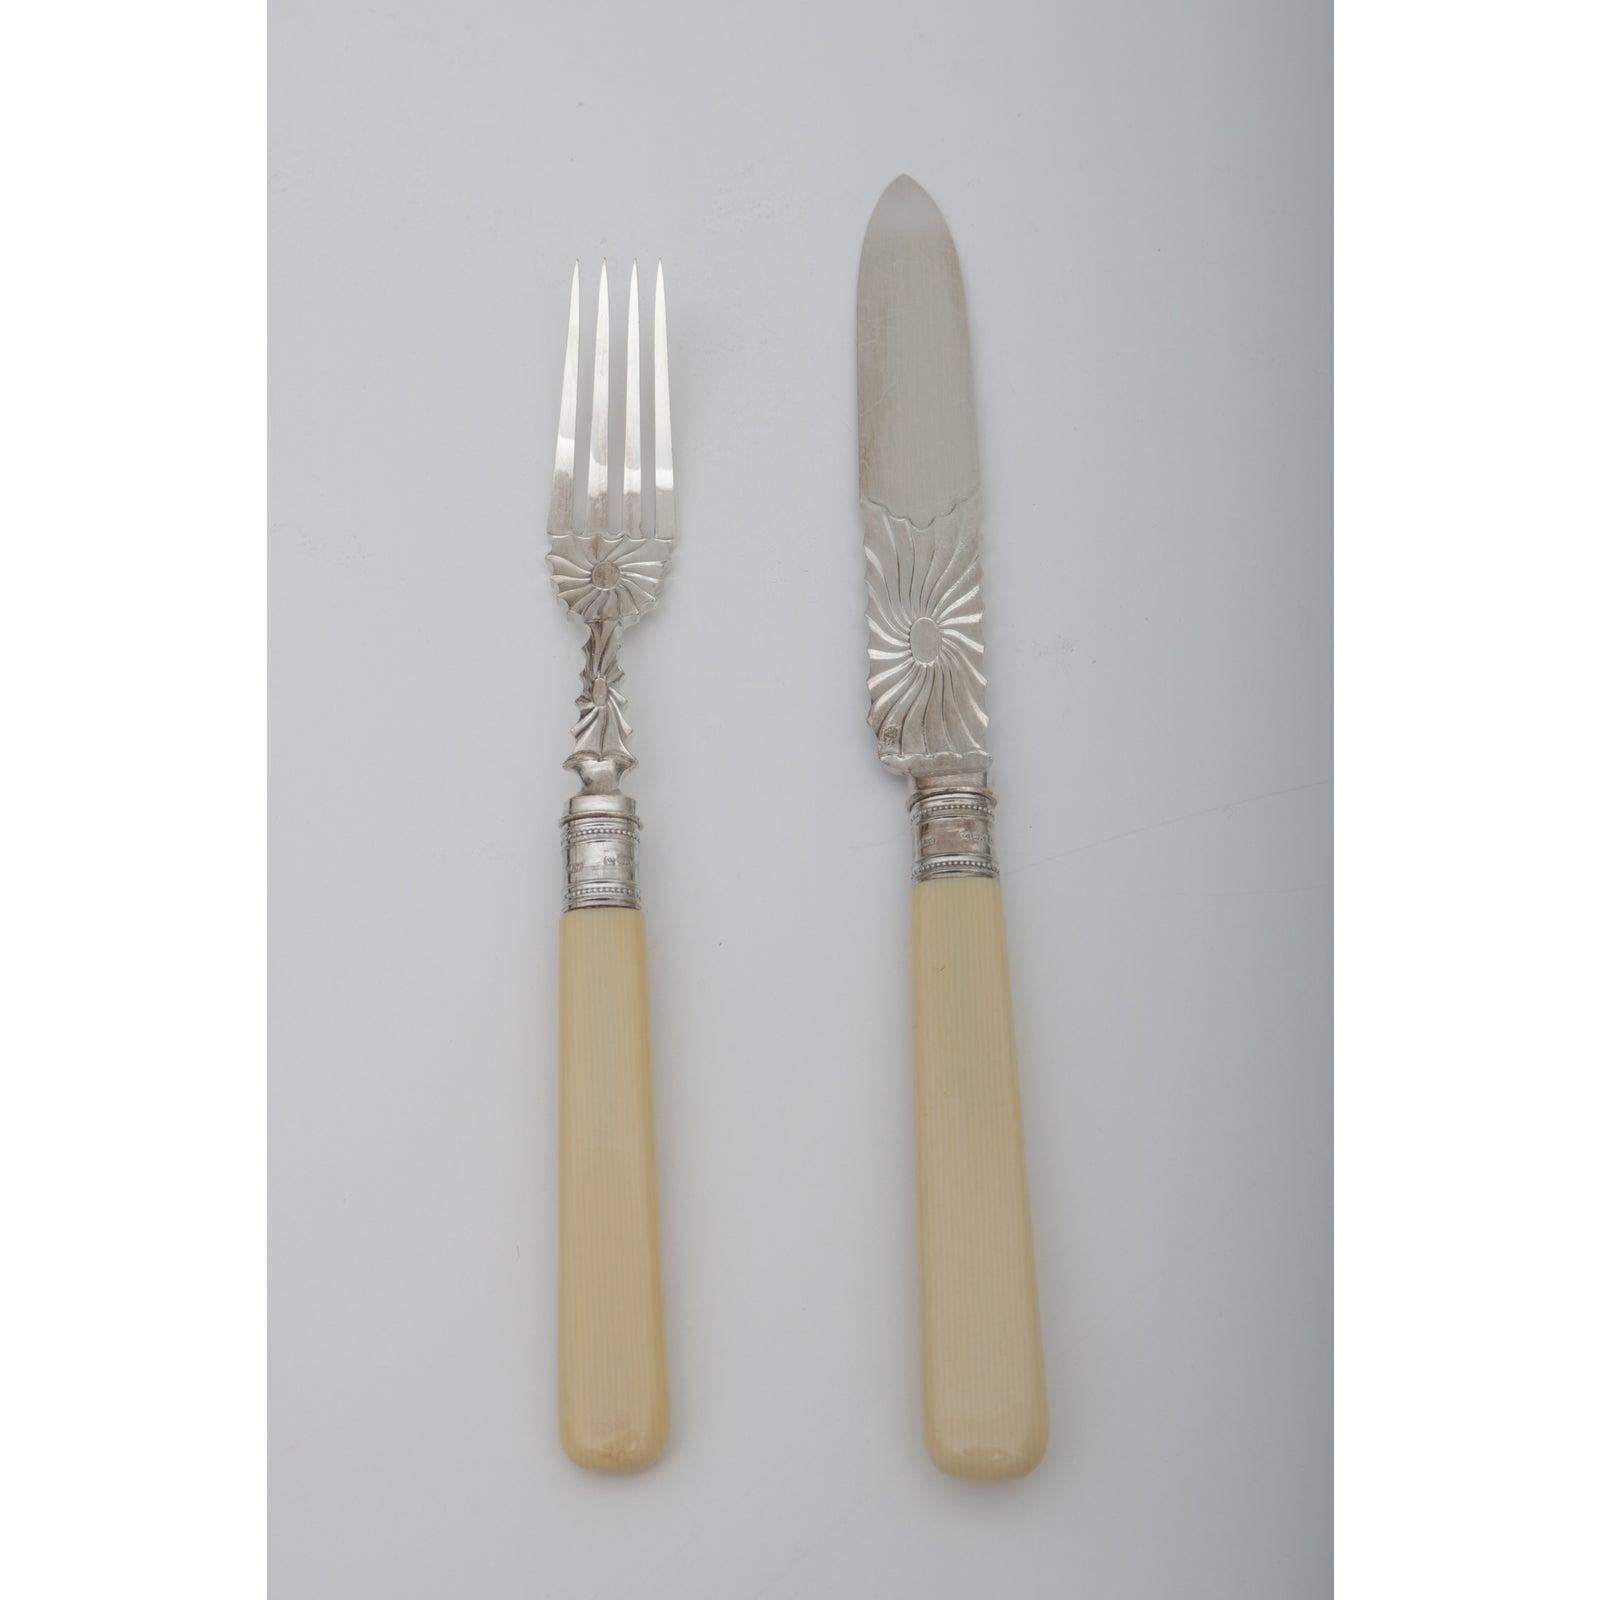 This stylish twelve (12) piece place setting dessert set dates to the early 1900s-1920s and is the Edwardian taste. The set is composed of twelve knives and twelve forks that are fabricated in silver plate with celloide handles in an oakwood